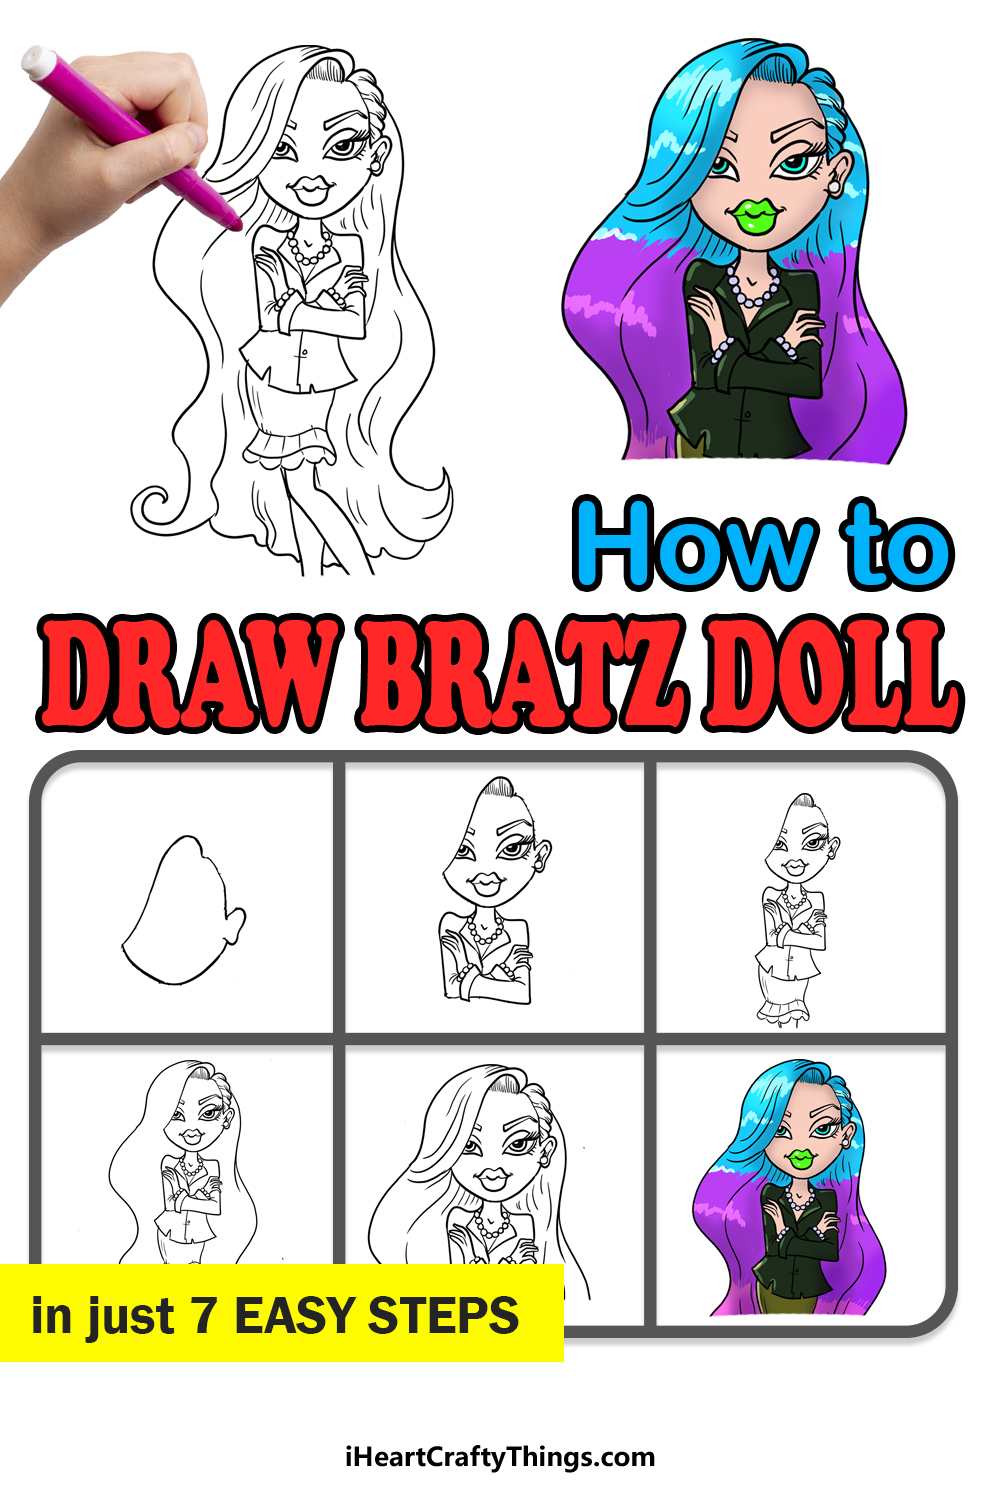 How to Draw A Bratz Doll step by step guide